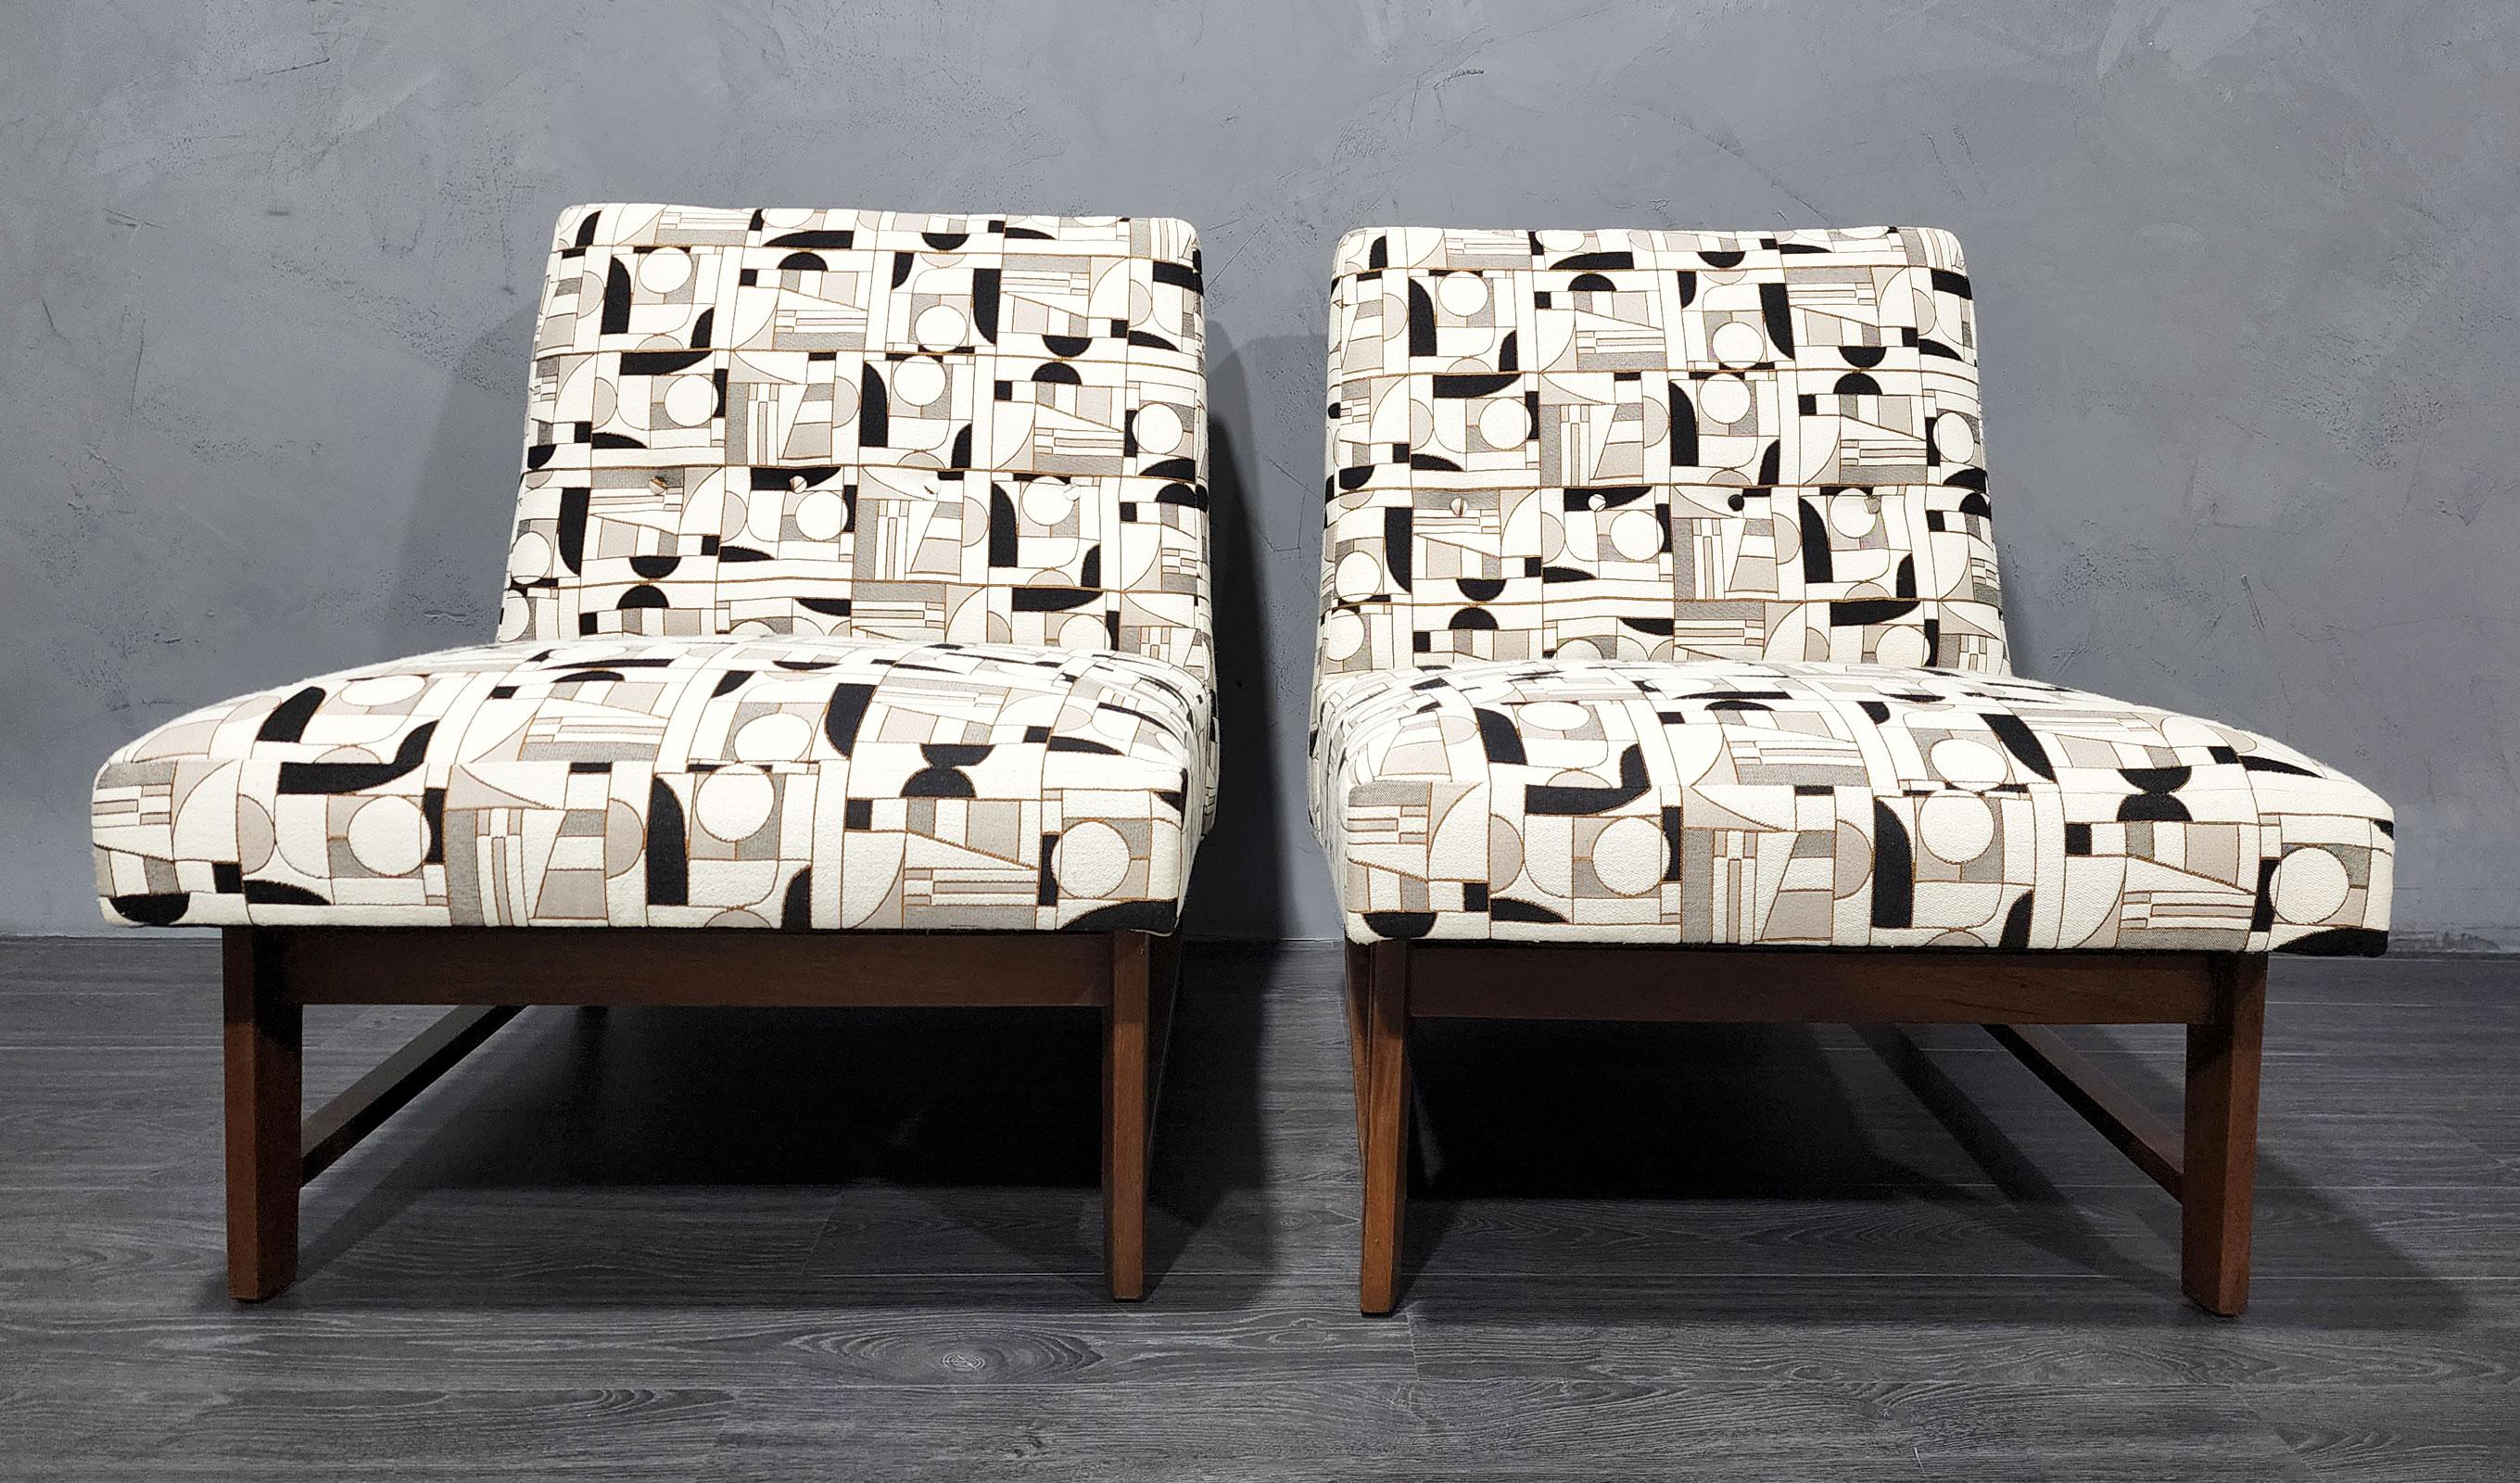 A pair of iconic slipper chairs by Edward Wormley for Dunbar. We have reupholstered these in a French woven fabric of very high quality. Colors include off-white, black , taupe and a coppery metallic.